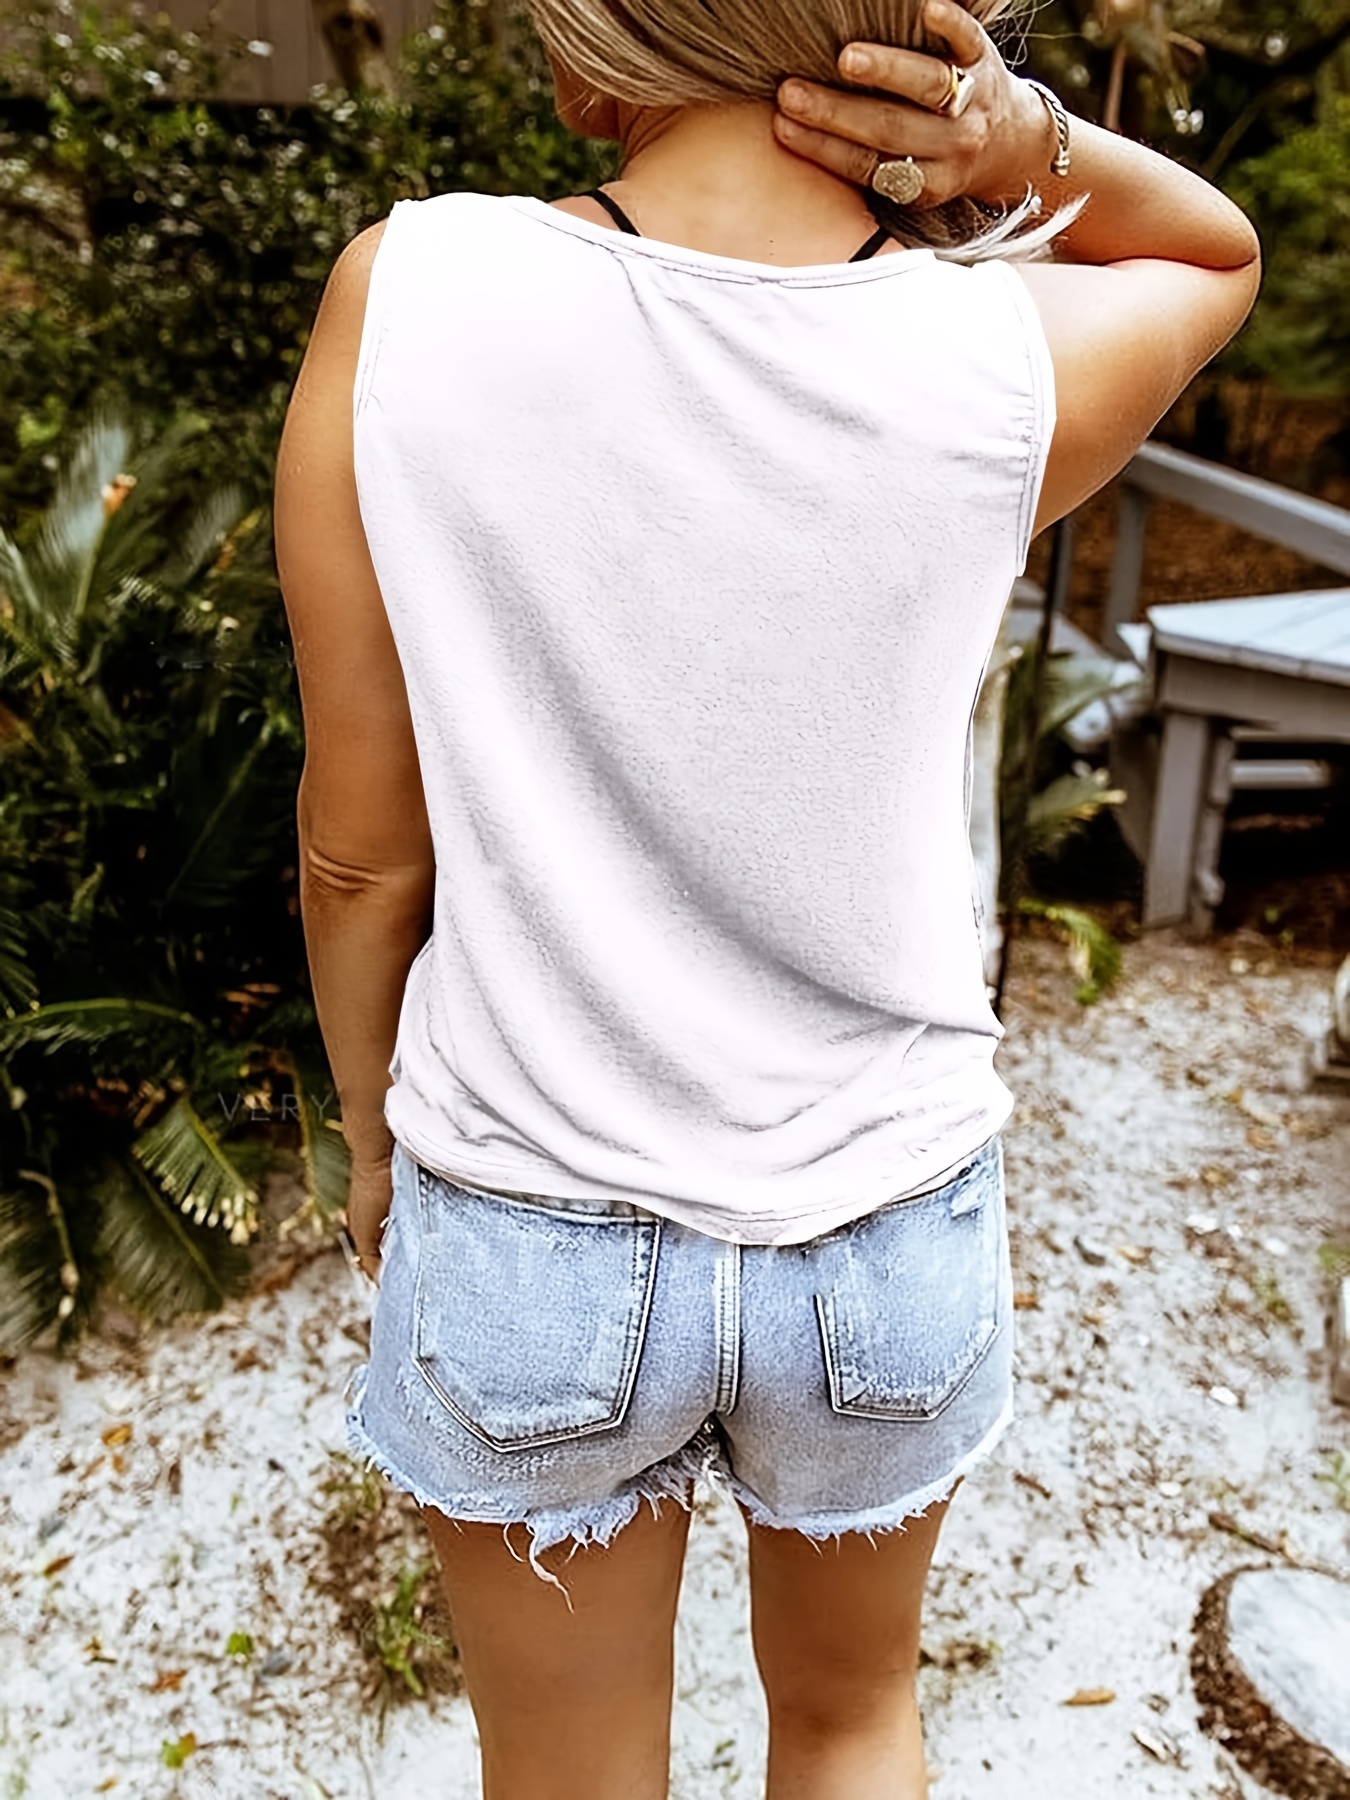 13 Best Cami Tank Tops to Buy This Summer